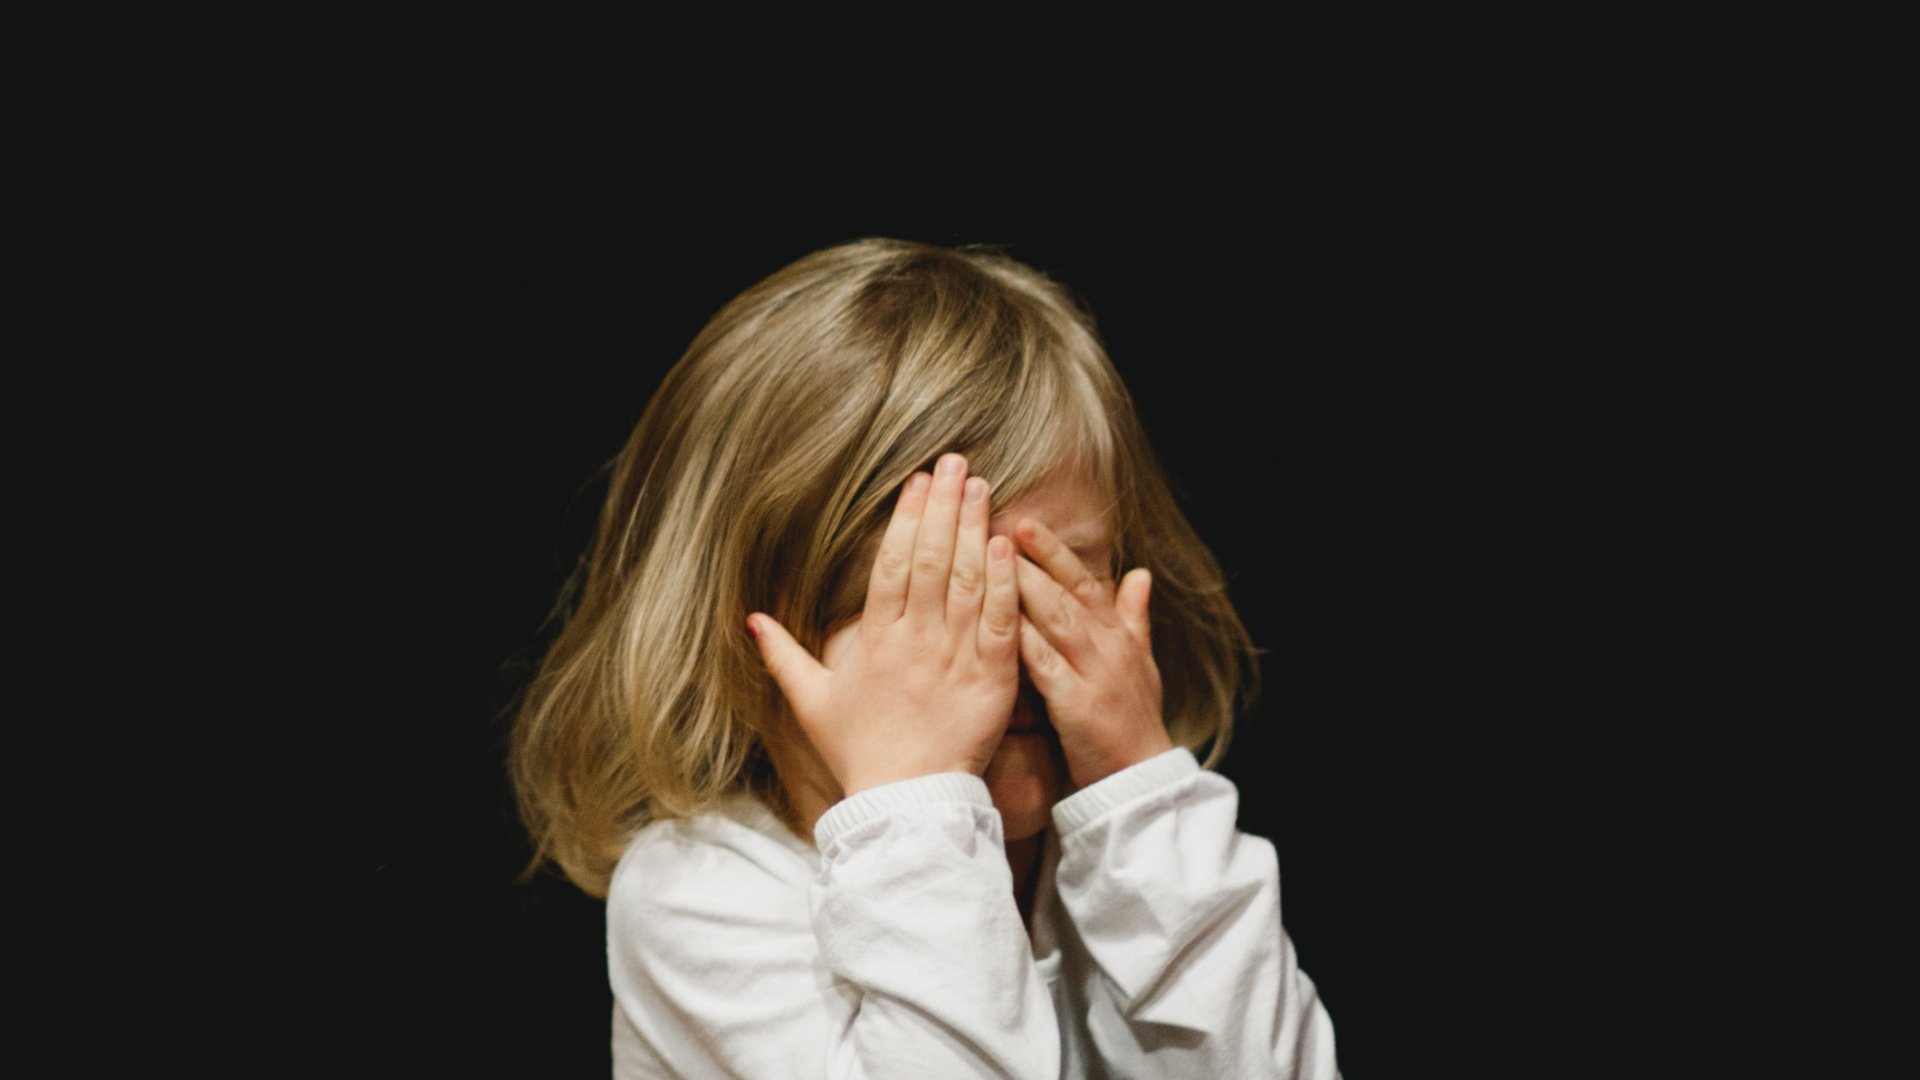 Child with face hidden behind their hands